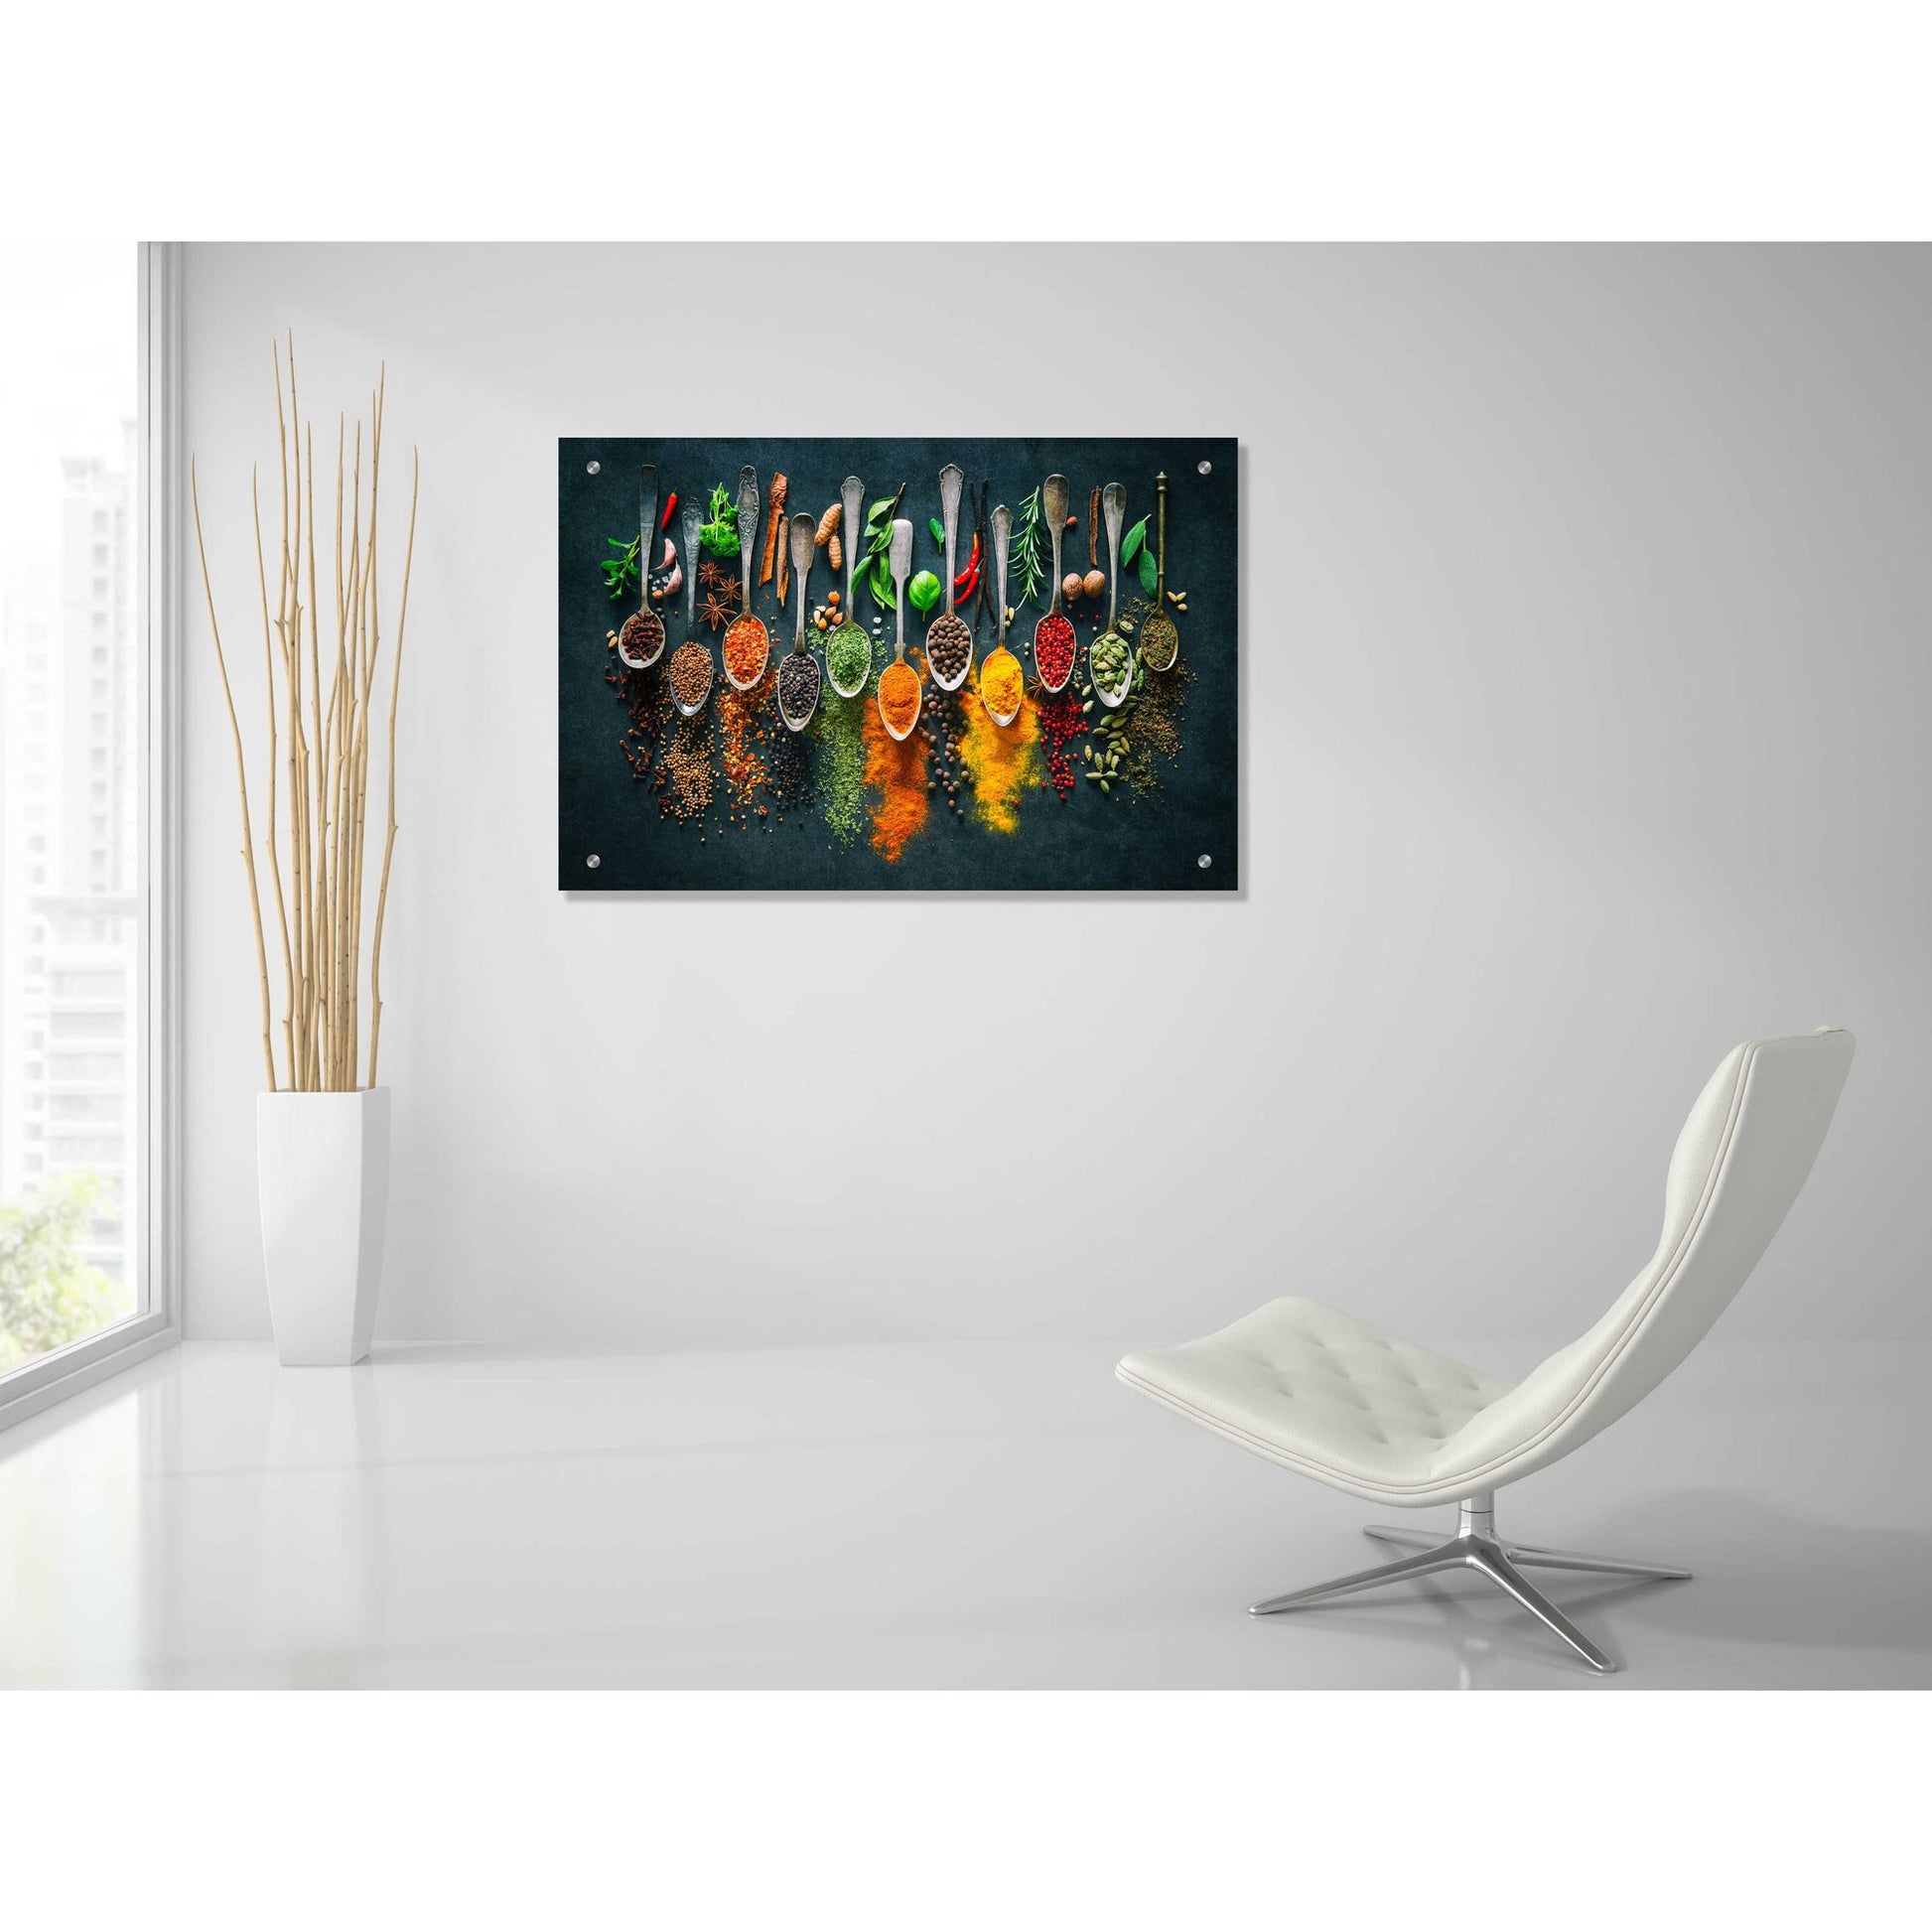 Epic Art 'Colorful Spices,' Acrylic Glass Wall Art,36x24